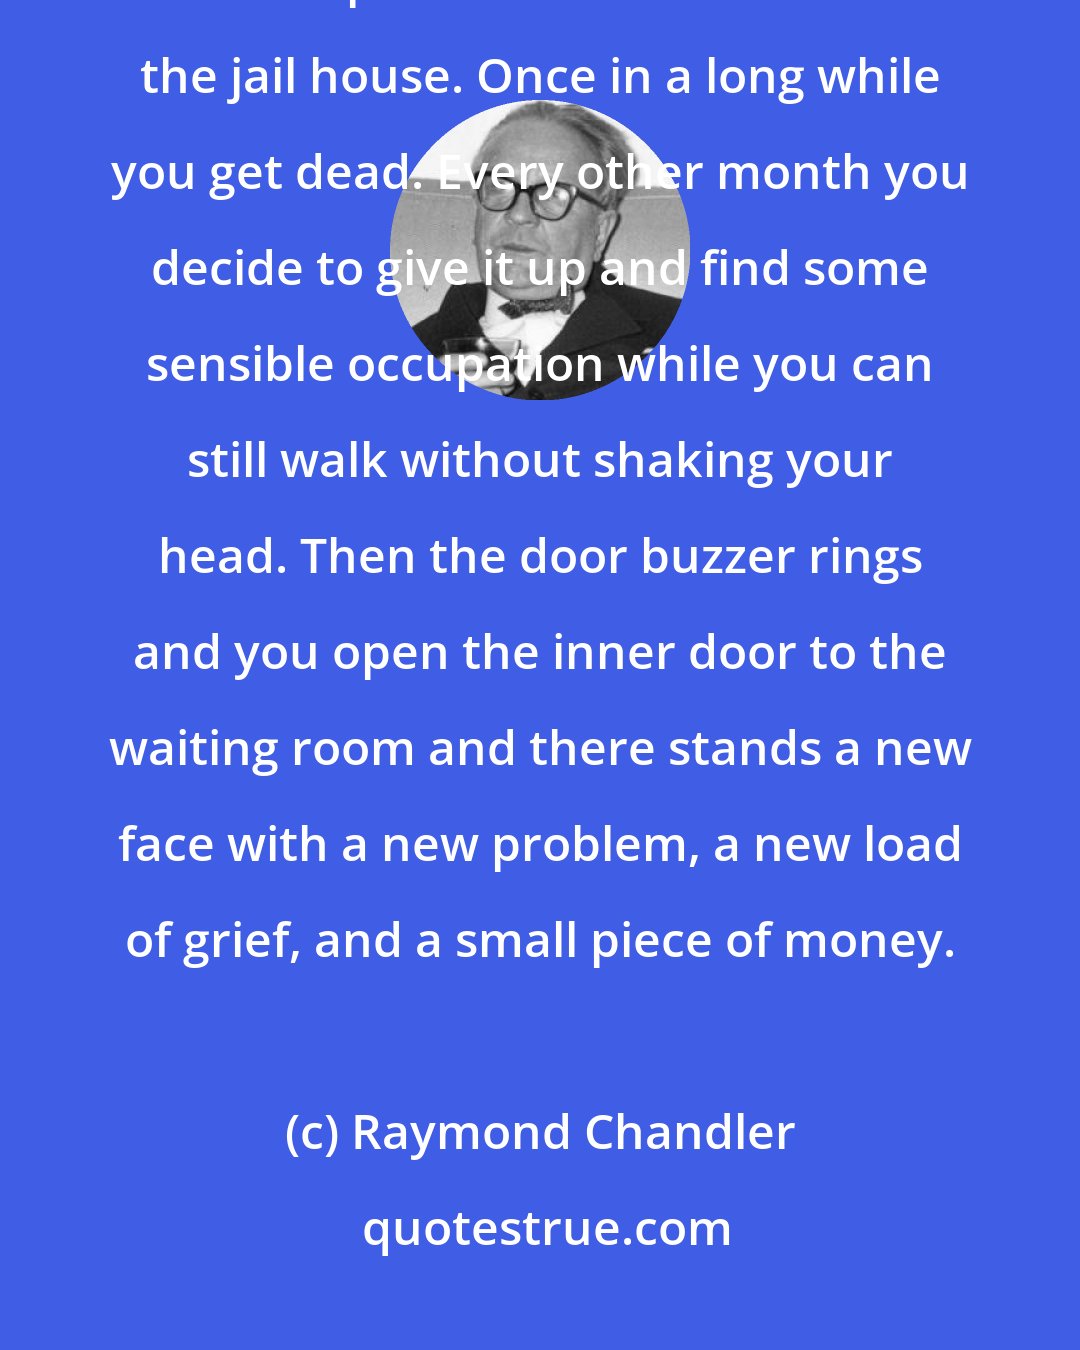 Raymond Chandler: You don't get rich, you don't often have much fun. Sometimes you get beaten up or shot at or tossed into the jail house. Once in a long while you get dead. Every other month you decide to give it up and find some sensible occupation while you can still walk without shaking your head. Then the door buzzer rings and you open the inner door to the waiting room and there stands a new face with a new problem, a new load of grief, and a small piece of money.